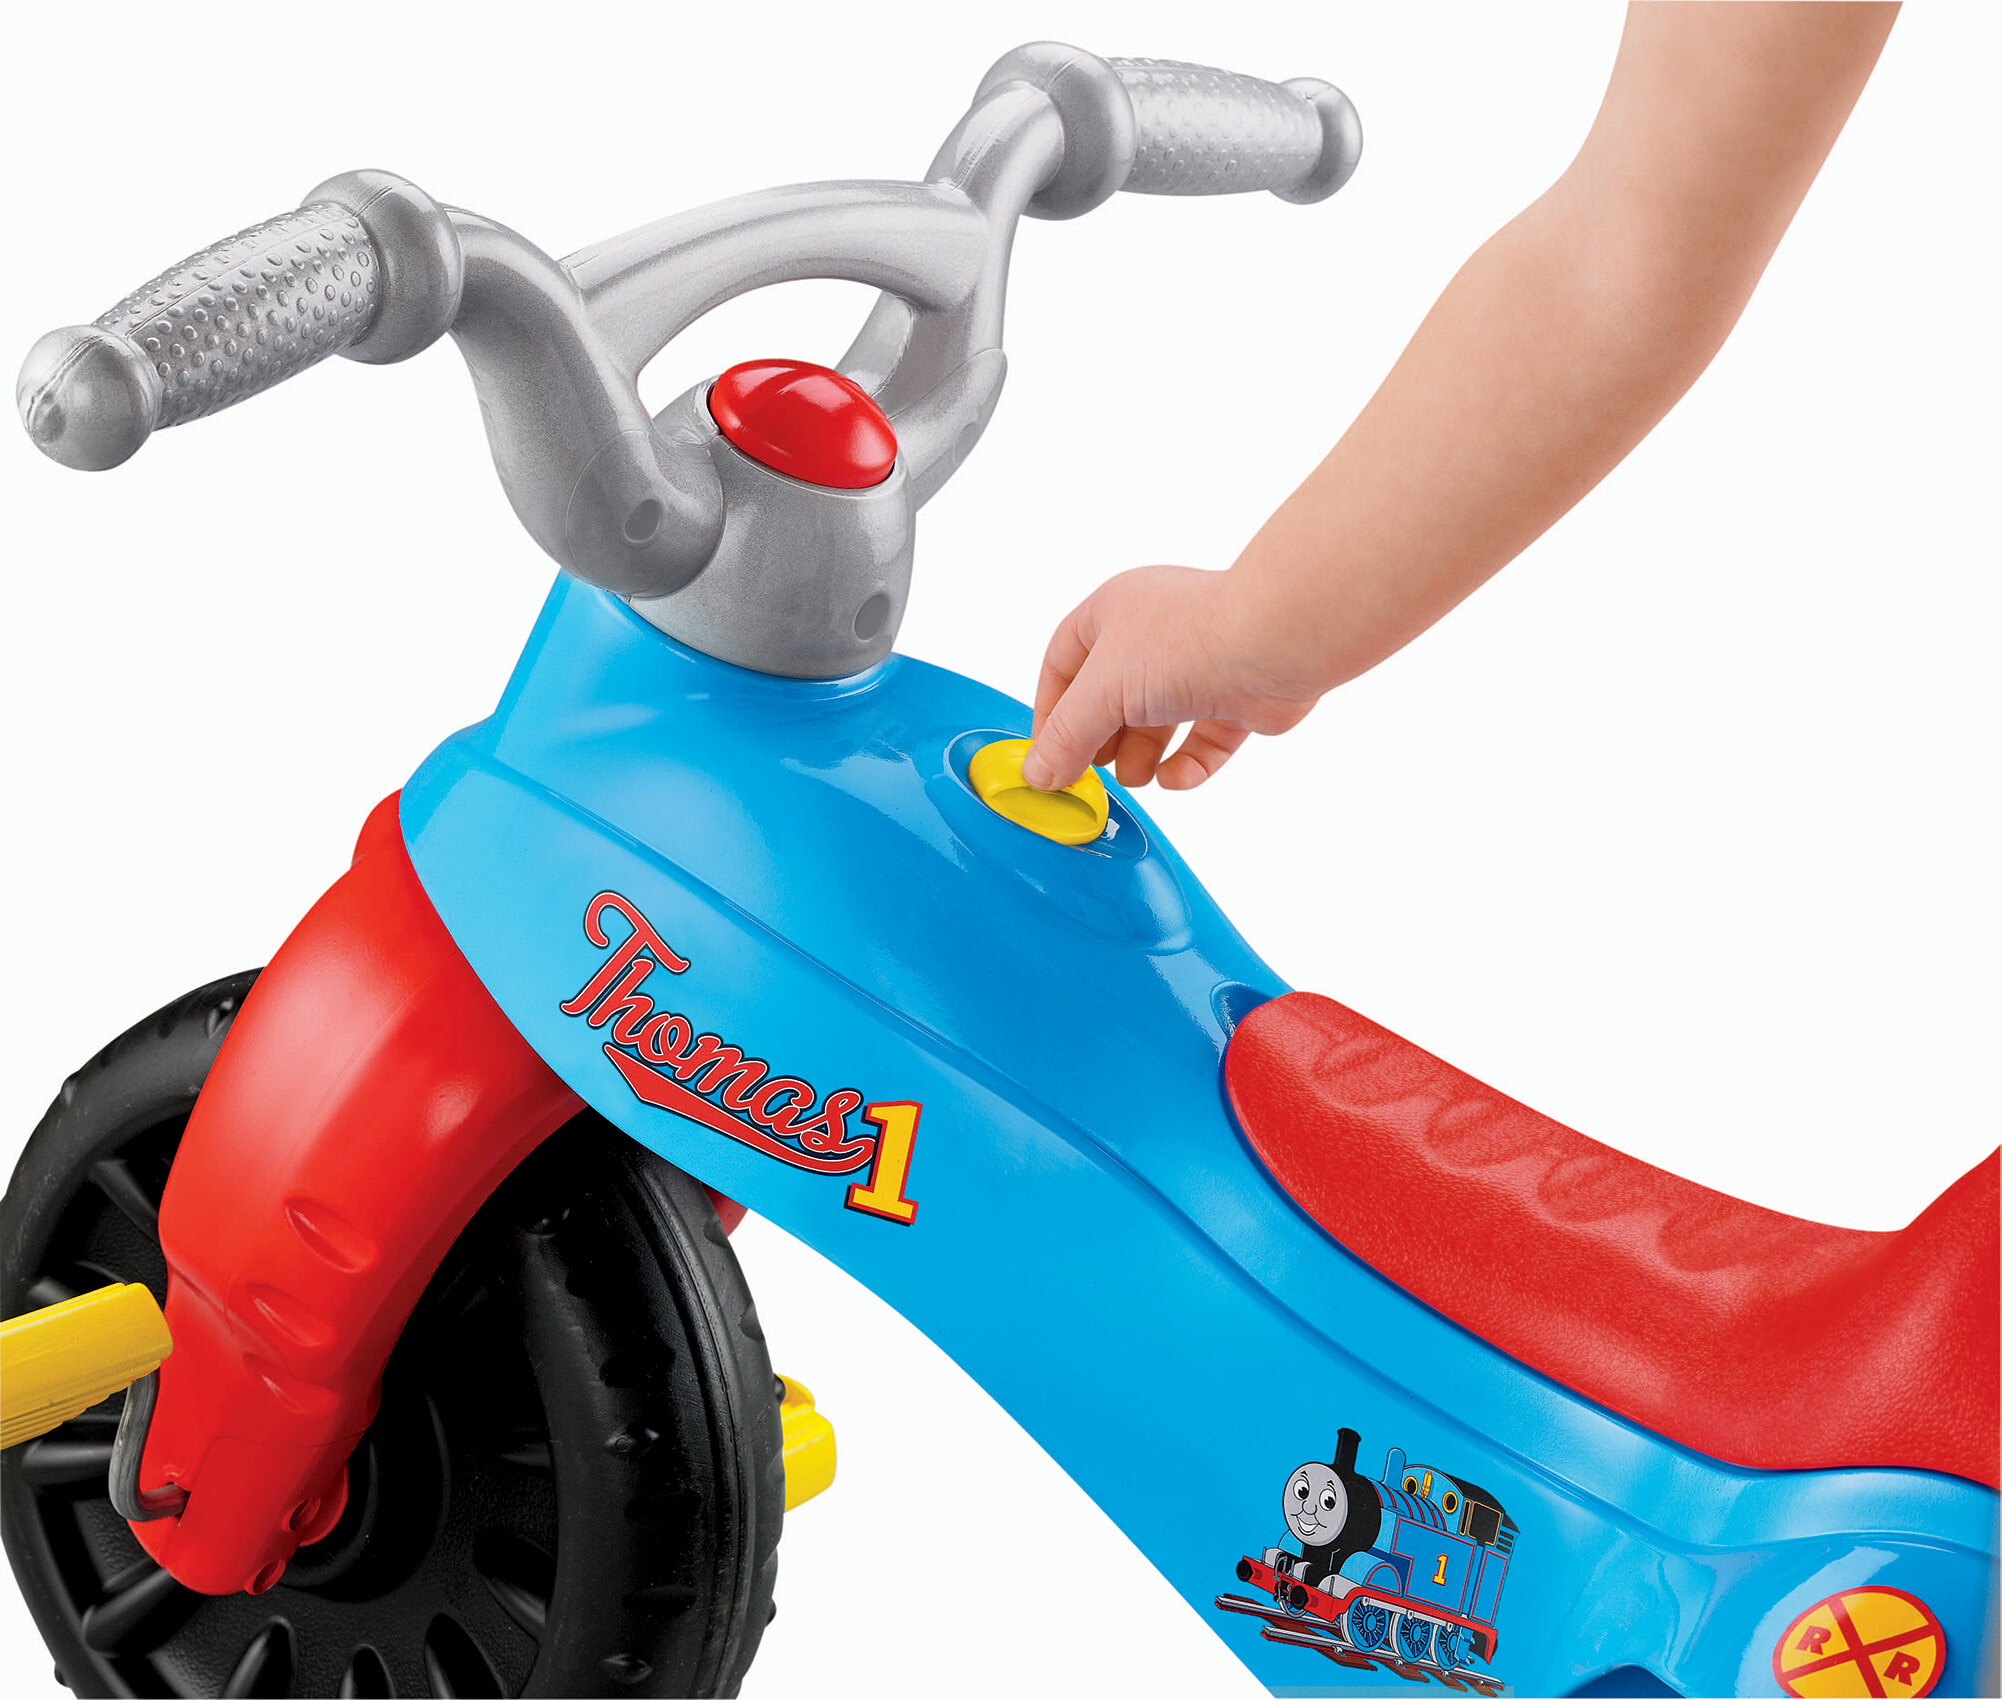 Thomas & Friends Tough Trike Push & Pedal Ride-On Toddler Tricycle - image 5 of 6